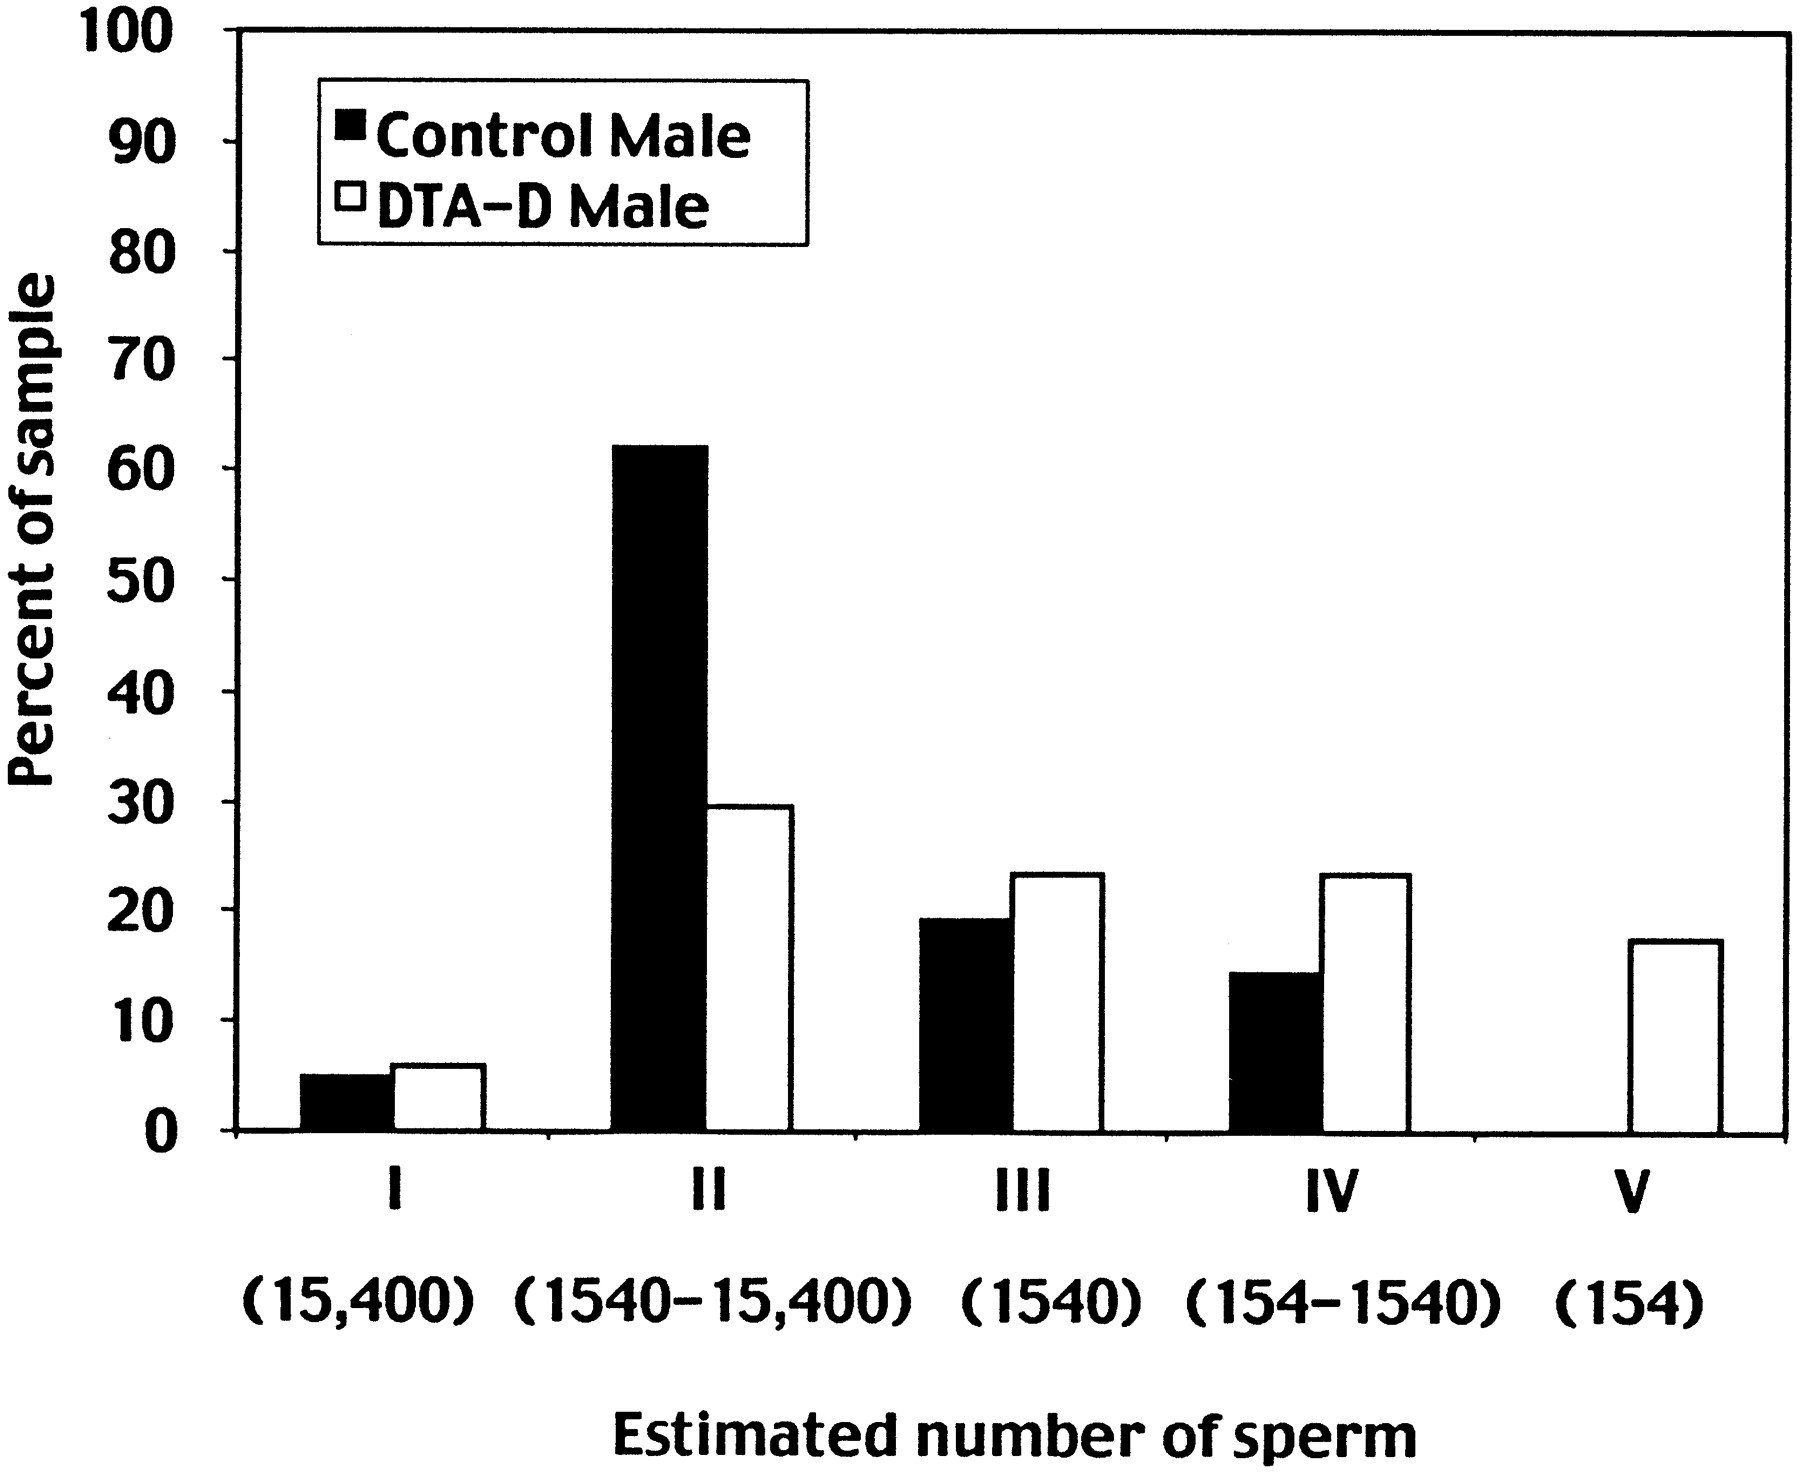 Sperm counts and initial sperm storage in d. melanogaster